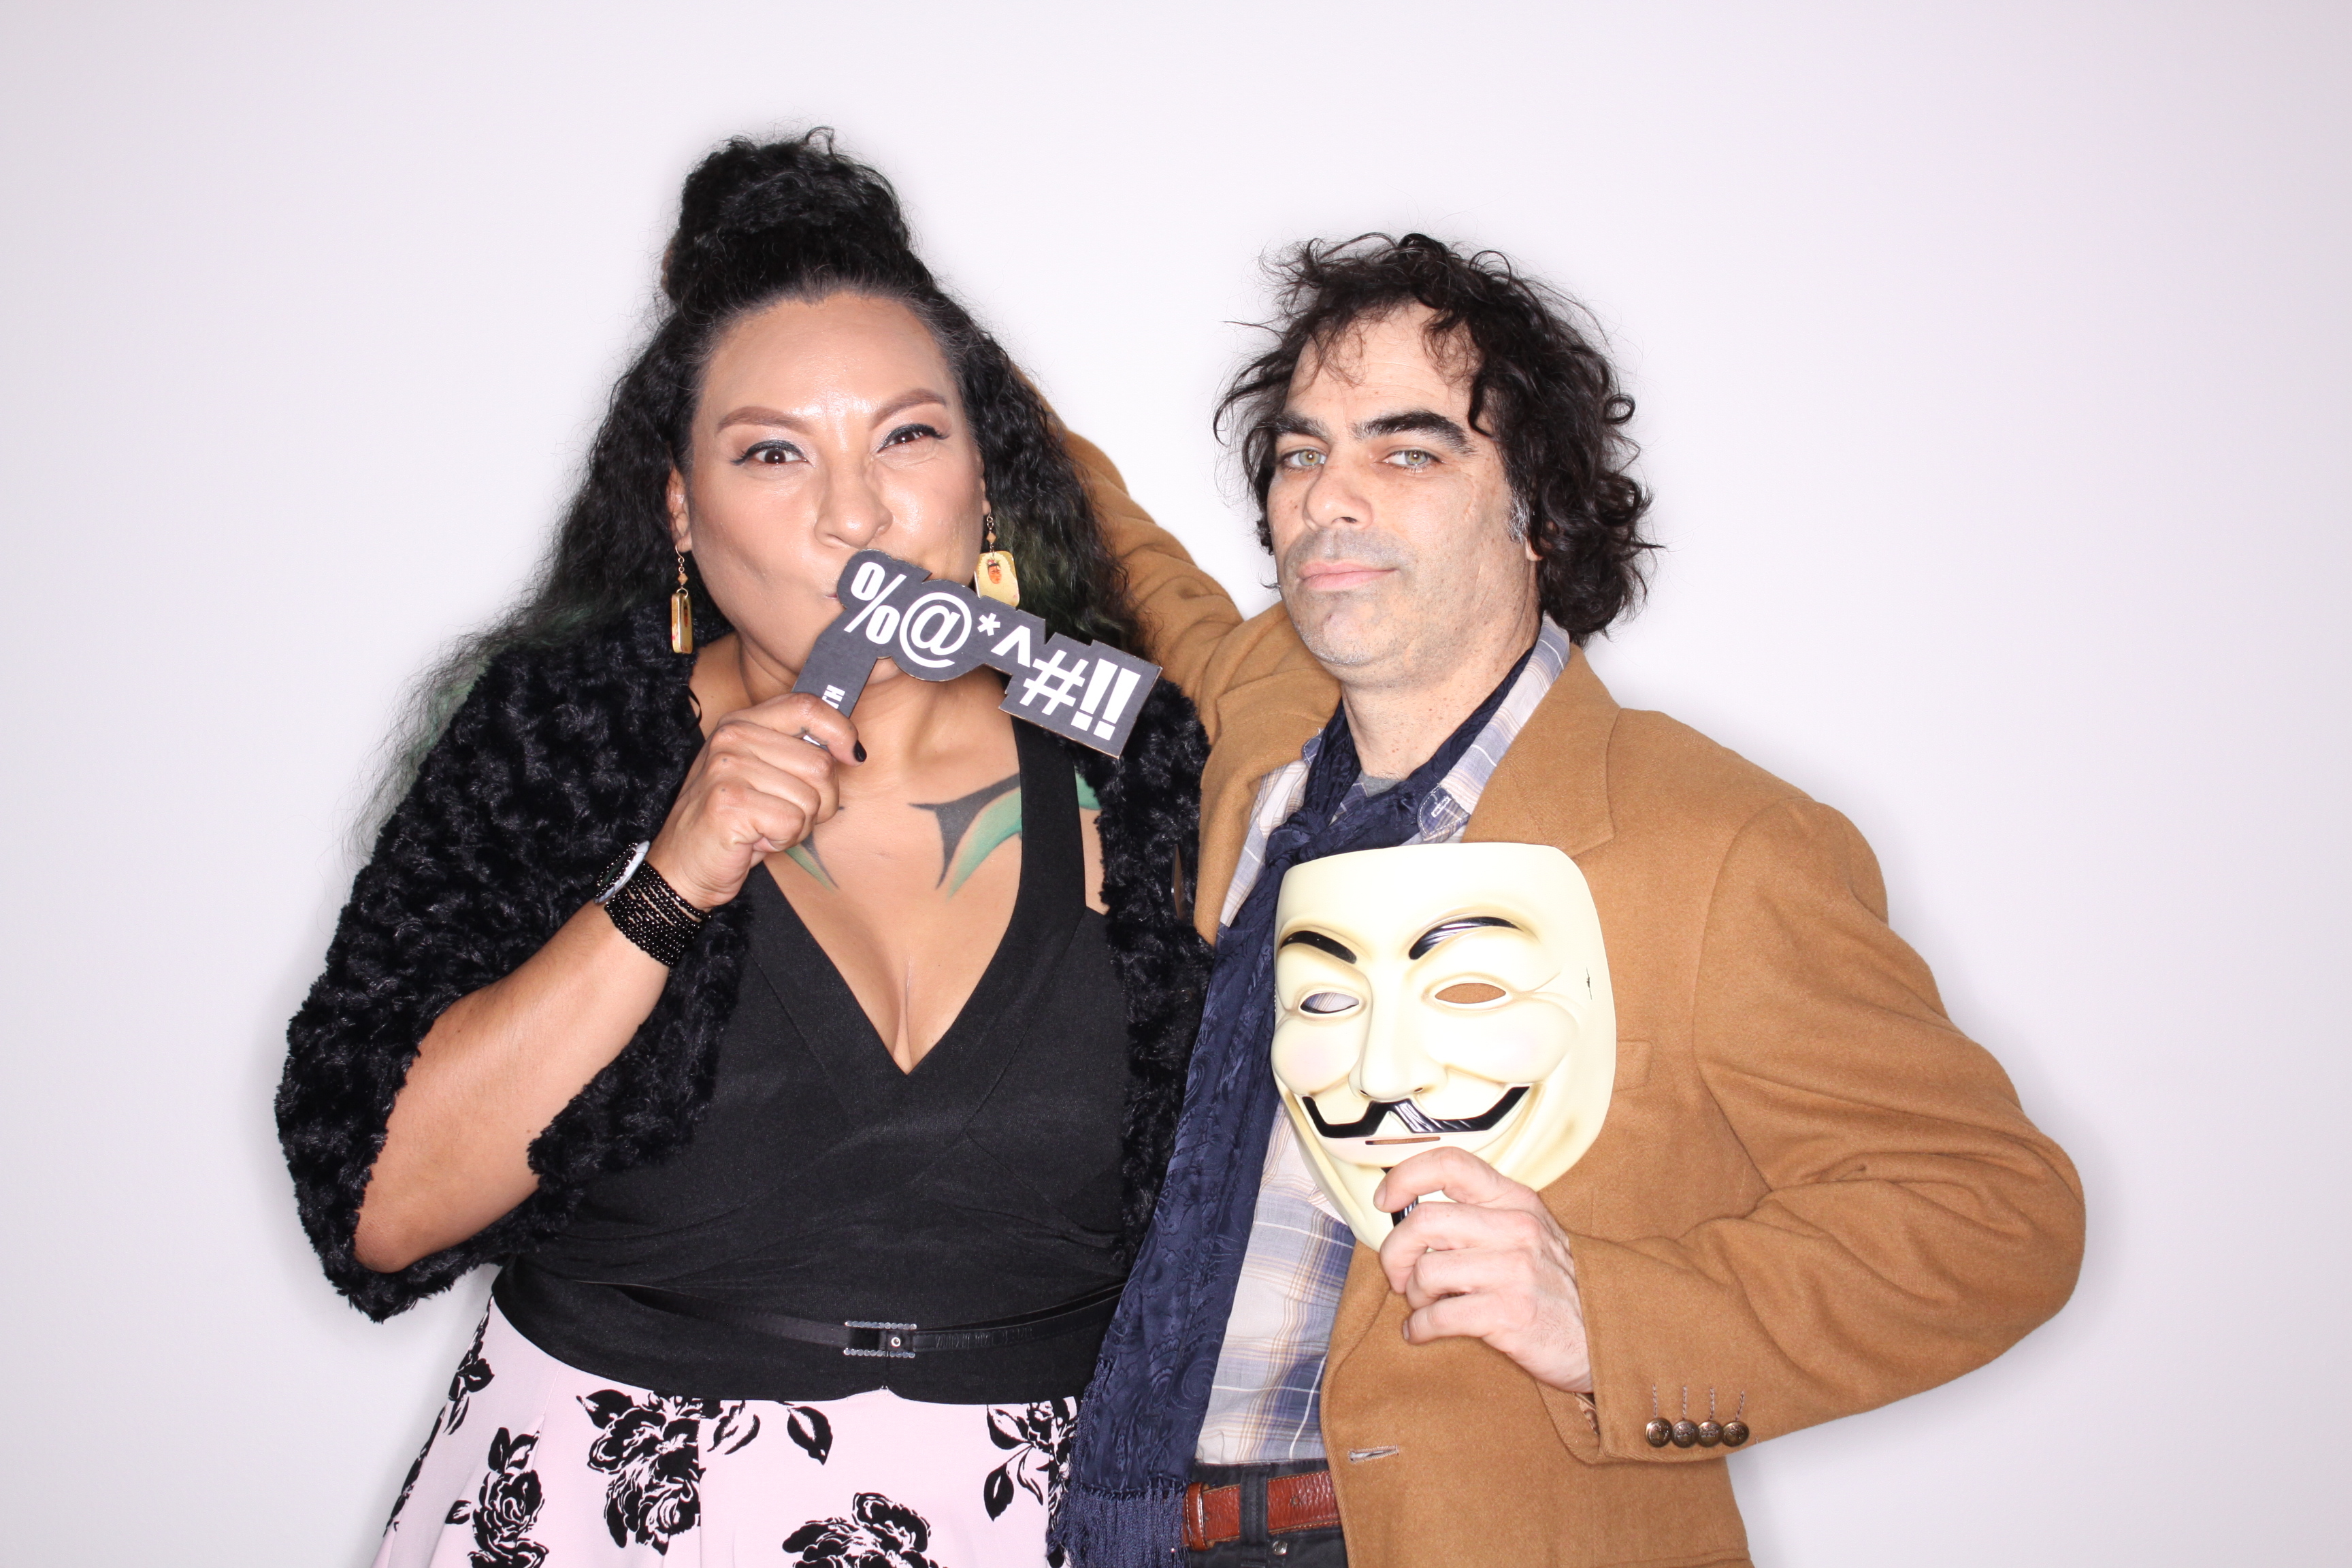 A woman in a black dress with a pink and black skirt is holding a small black sign with a %@*^#!! printed in white front of her mouth. A man in a caramel colored jacket stands next to her holding a white mask.